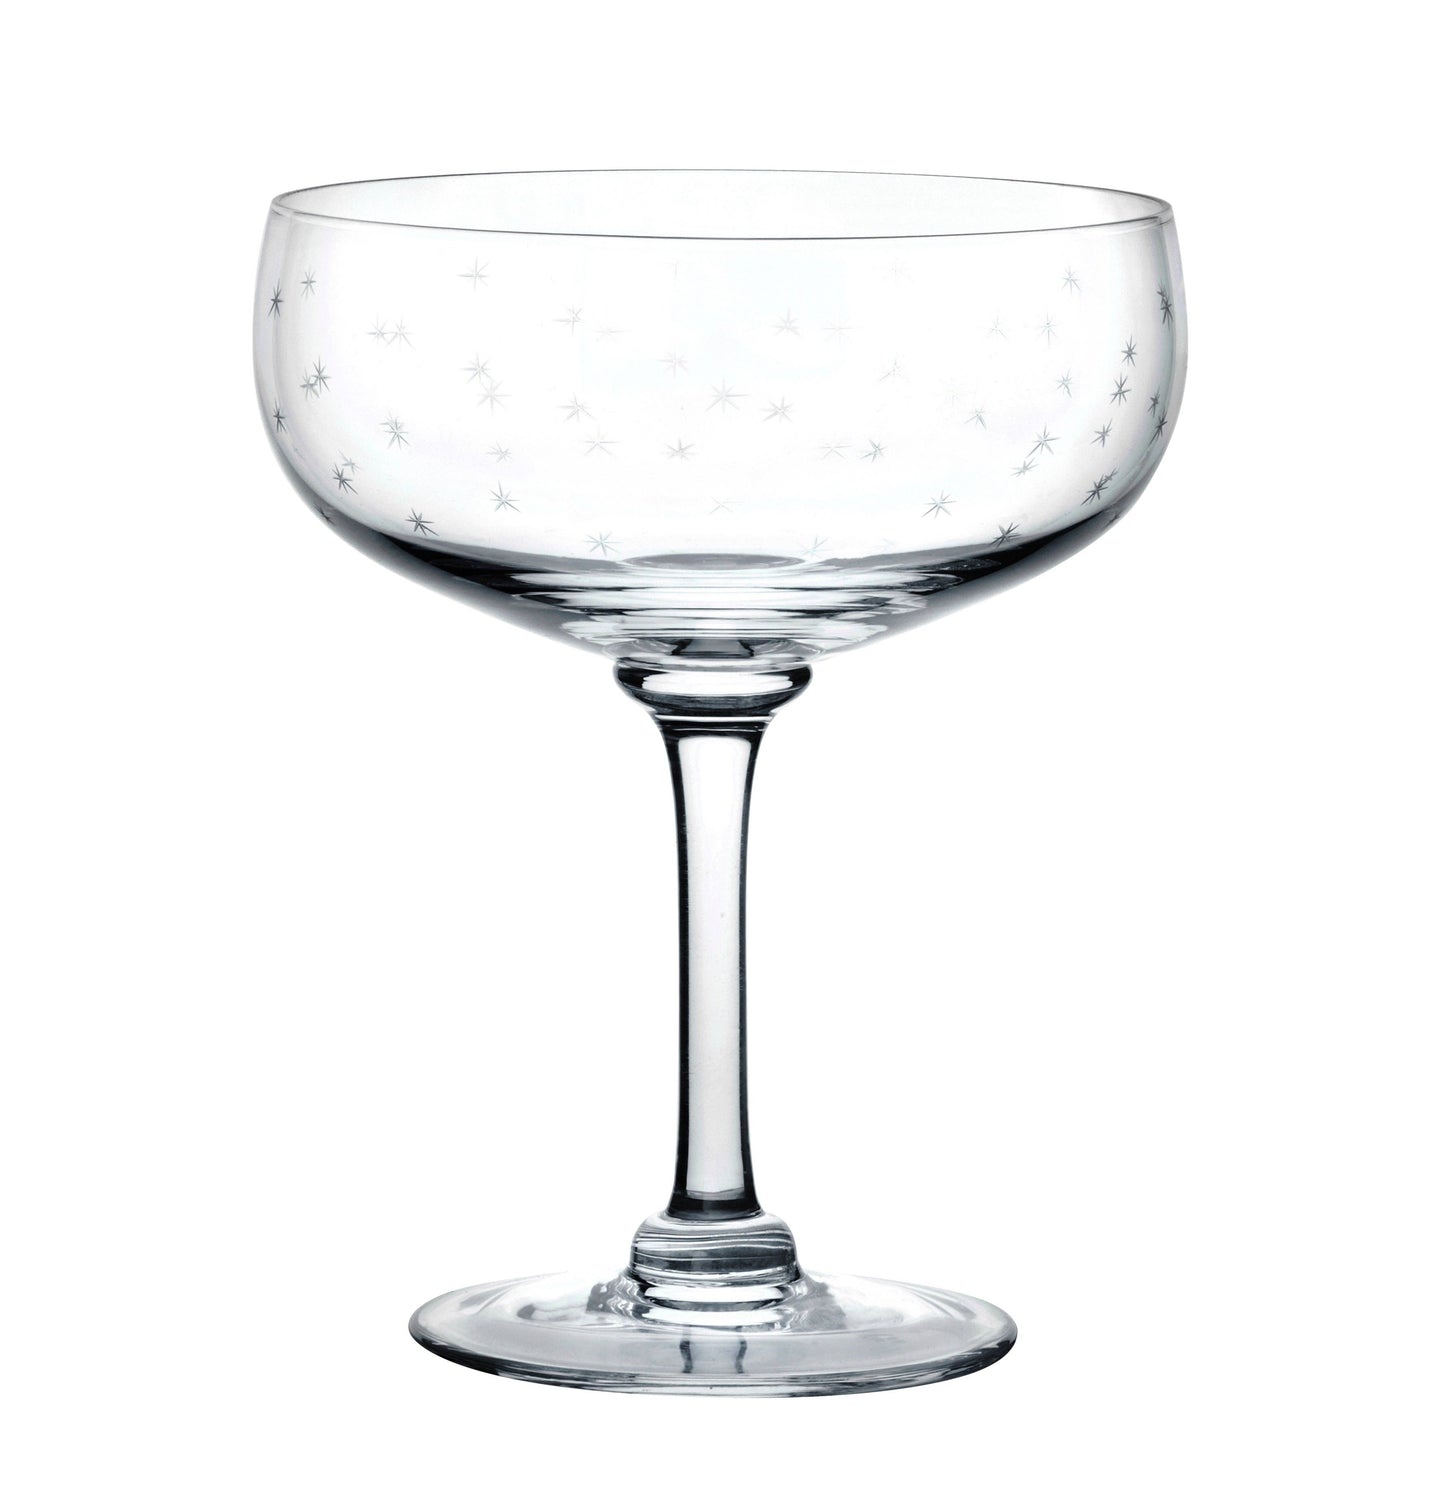 The Vintage List - A Set of Four Crystal Cocktail Glasses with Stars Design